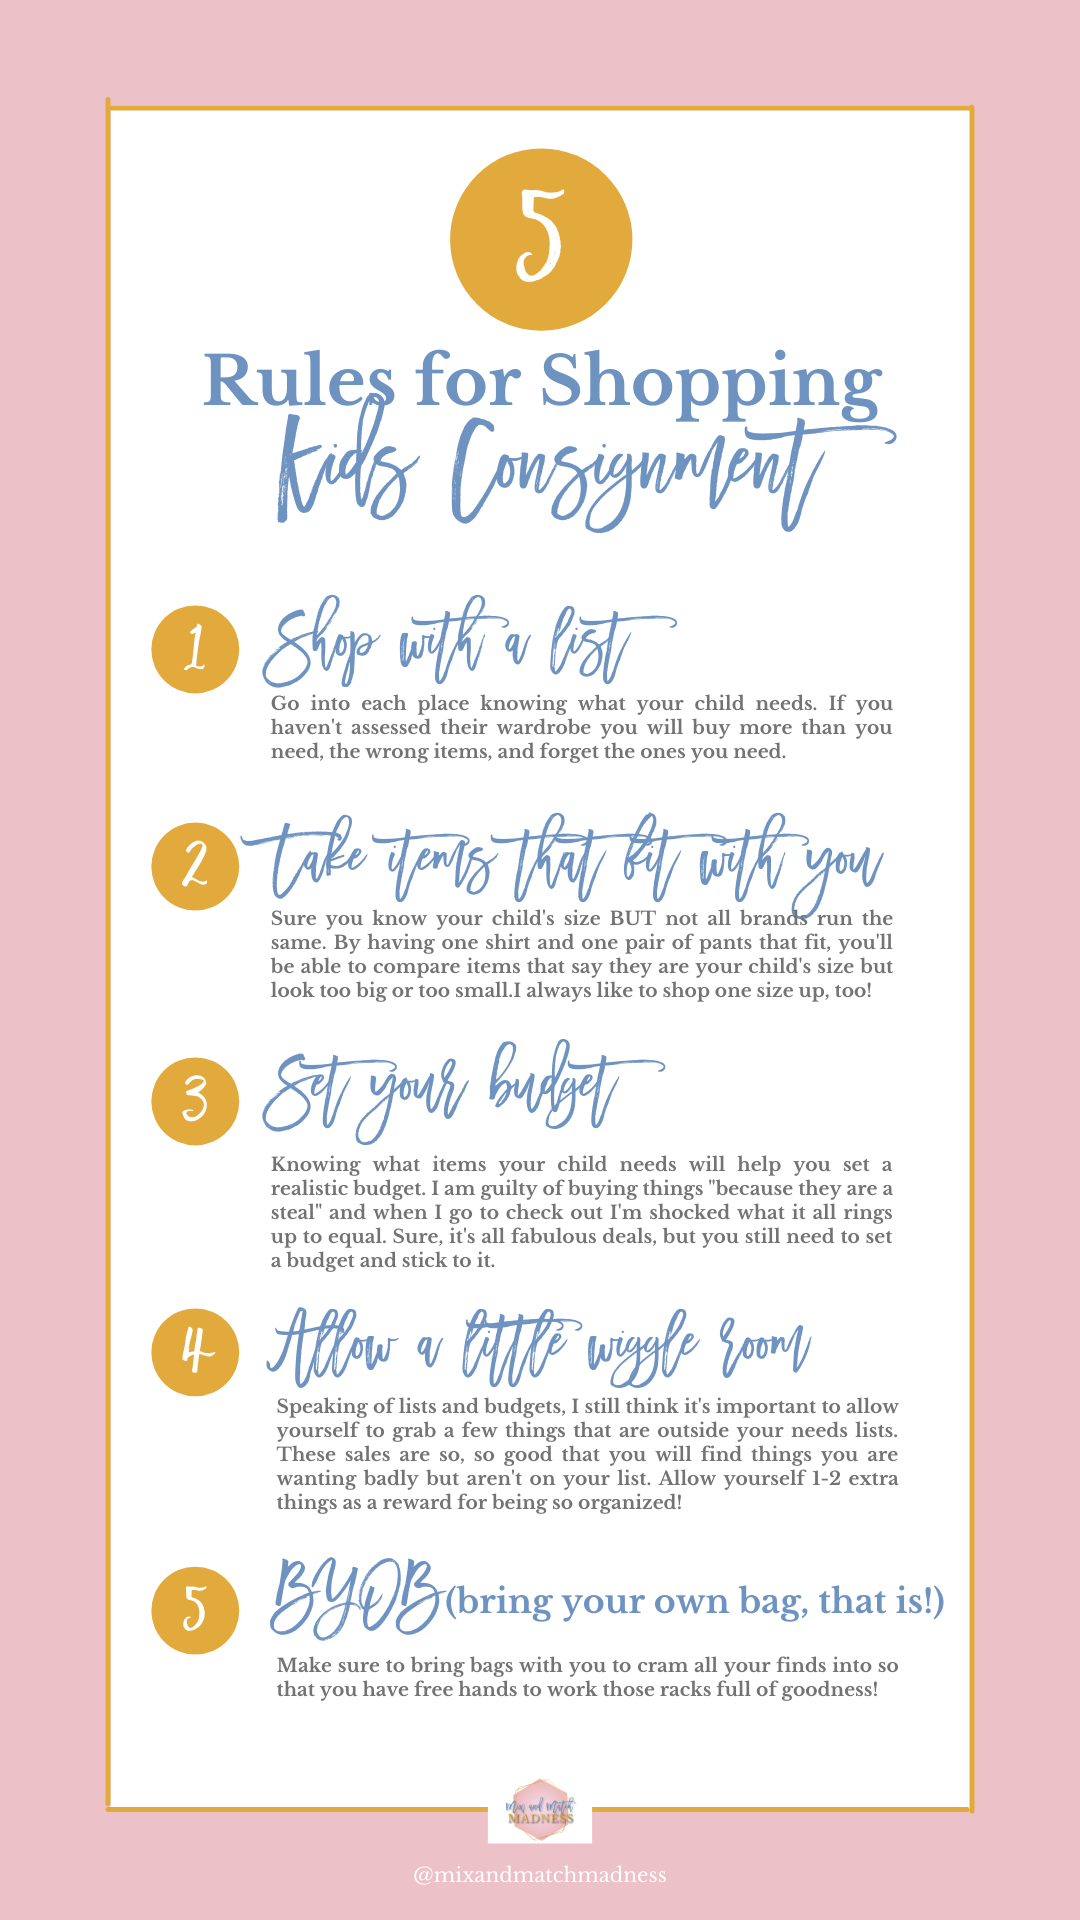 5 Rules for Shopping Kids Consignment Image